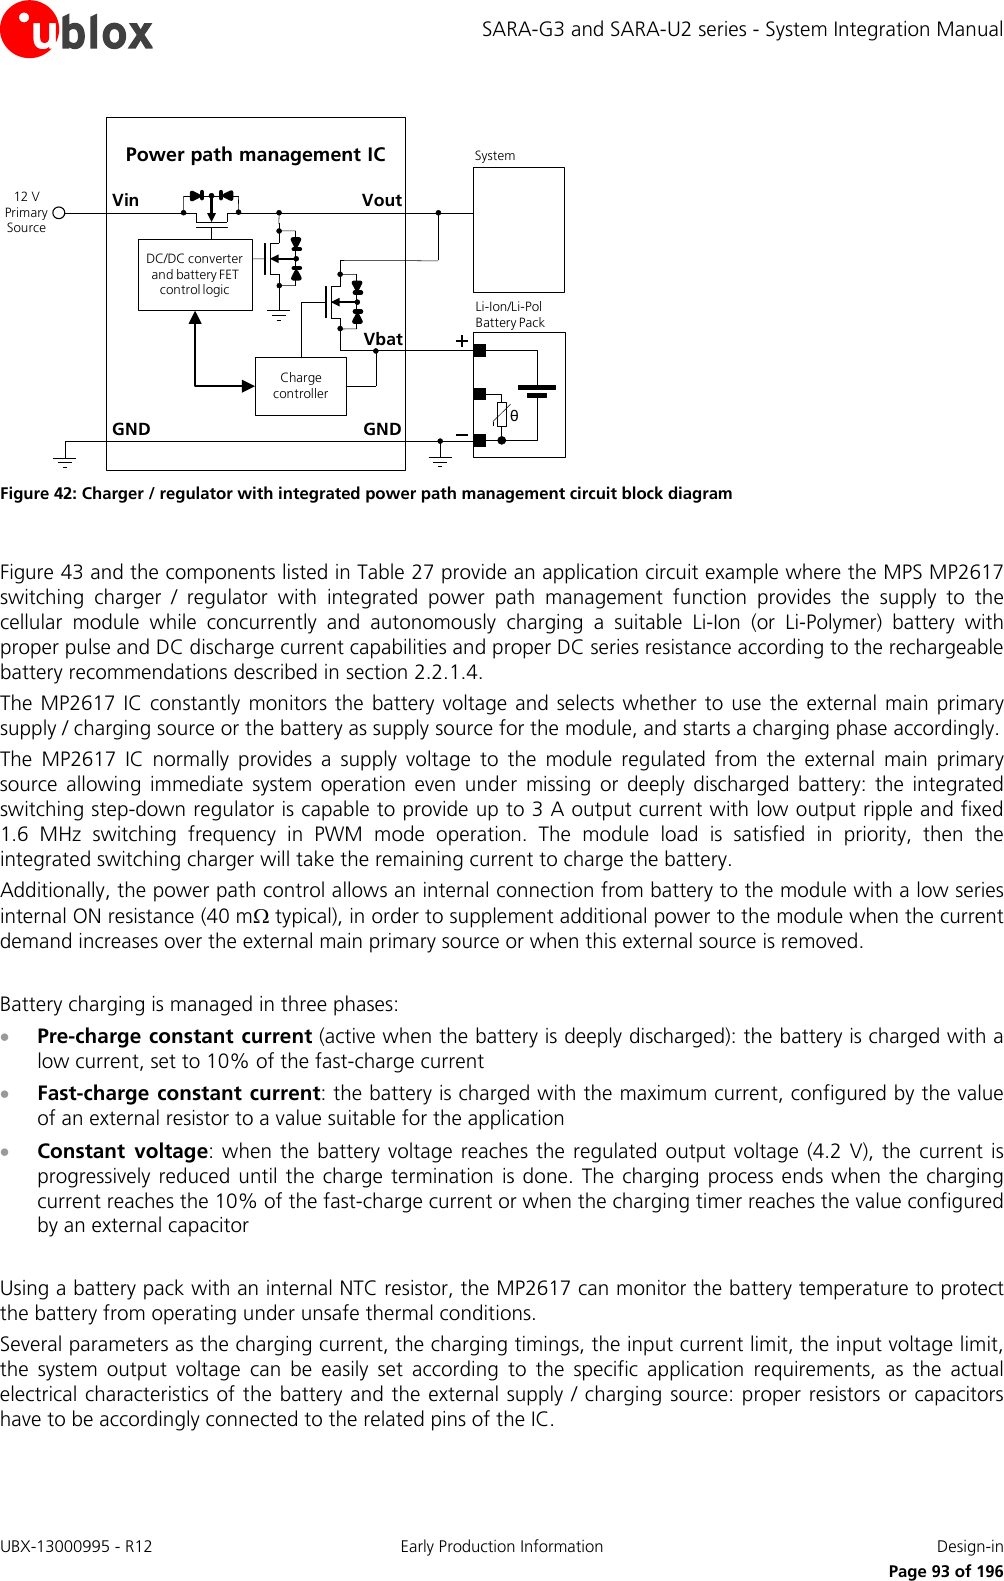 SARA-G3 and SARA-U2 series - System Integration Manual GNDPower path management ICVoutVinθLi-Ion/Li-Pol Battery PackGNDSystem12 V Primary SourceCharge controllerDC/DC converter and battery FET control logicVbat Figure 42: Charger / regulator with integrated power path management circuit block diagram  Figure 43 and the components listed in Table 27 provide an application circuit example where the MPS MP2617 switching charger / regulator with integrated power path management function provides the supply to the cellular module while concurrently and  autonomously charging  a suitable Li-Ion (or Li-Polymer) battery with proper pulse and DC discharge current capabilities and proper DC series resistance according to the rechargeable battery recommendations described in section 2.2.1.4. The MP2617  IC constantly monitors the battery voltage and selects whether to use the external main primary supply / charging source or the battery as supply source for the module, and starts a charging phase accordingly.  The MP2617 IC  normally  provides a supply  voltage to the module regulated from the external main primary source allowing immediate system operation even under missing or deeply discharged battery: the integrated switching step-down regulator is capable to provide up to 3 A output current with low output ripple and fixed 1.6 MHz switching frequency in PWM mode operation. The module load is satisfied in priority, then the integrated switching charger will take the remaining current to charge the battery. Additionally, the power path control allows an internal connection from battery to the module with a low series internal ON resistance (40 mΩ typical), in order to supplement additional power to the module when the current demand increases over the external main primary source or when this external source is removed.  Battery charging is managed in three phases: • Pre-charge constant current (active when the battery is deeply discharged): the battery is charged with a low current, set to 10% of the fast-charge current • Fast-charge constant current: the battery is charged with the maximum current, configured by the value of an external resistor to a value suitable for the application • Constant voltage: when the battery voltage reaches the regulated output voltage (4.2 V), the current is progressively reduced until the charge termination is done. The charging process ends when the charging current reaches the 10% of the fast-charge current or when the charging timer reaches the value configured by an external capacitor  Using a battery pack with an internal NTC resistor, the MP2617 can monitor the battery temperature to protect the battery from operating under unsafe thermal conditions. Several parameters as the charging current, the charging timings, the input current limit, the input voltage limit, the system output voltage can be easily set according to the specific application requirements, as the actual electrical characteristics of the battery and the external supply / charging source: proper resistors or capacitors have to be accordingly connected to the related pins of the IC.  UBX-13000995 - R12 Early Production Information Design-in     Page 93 of 196 